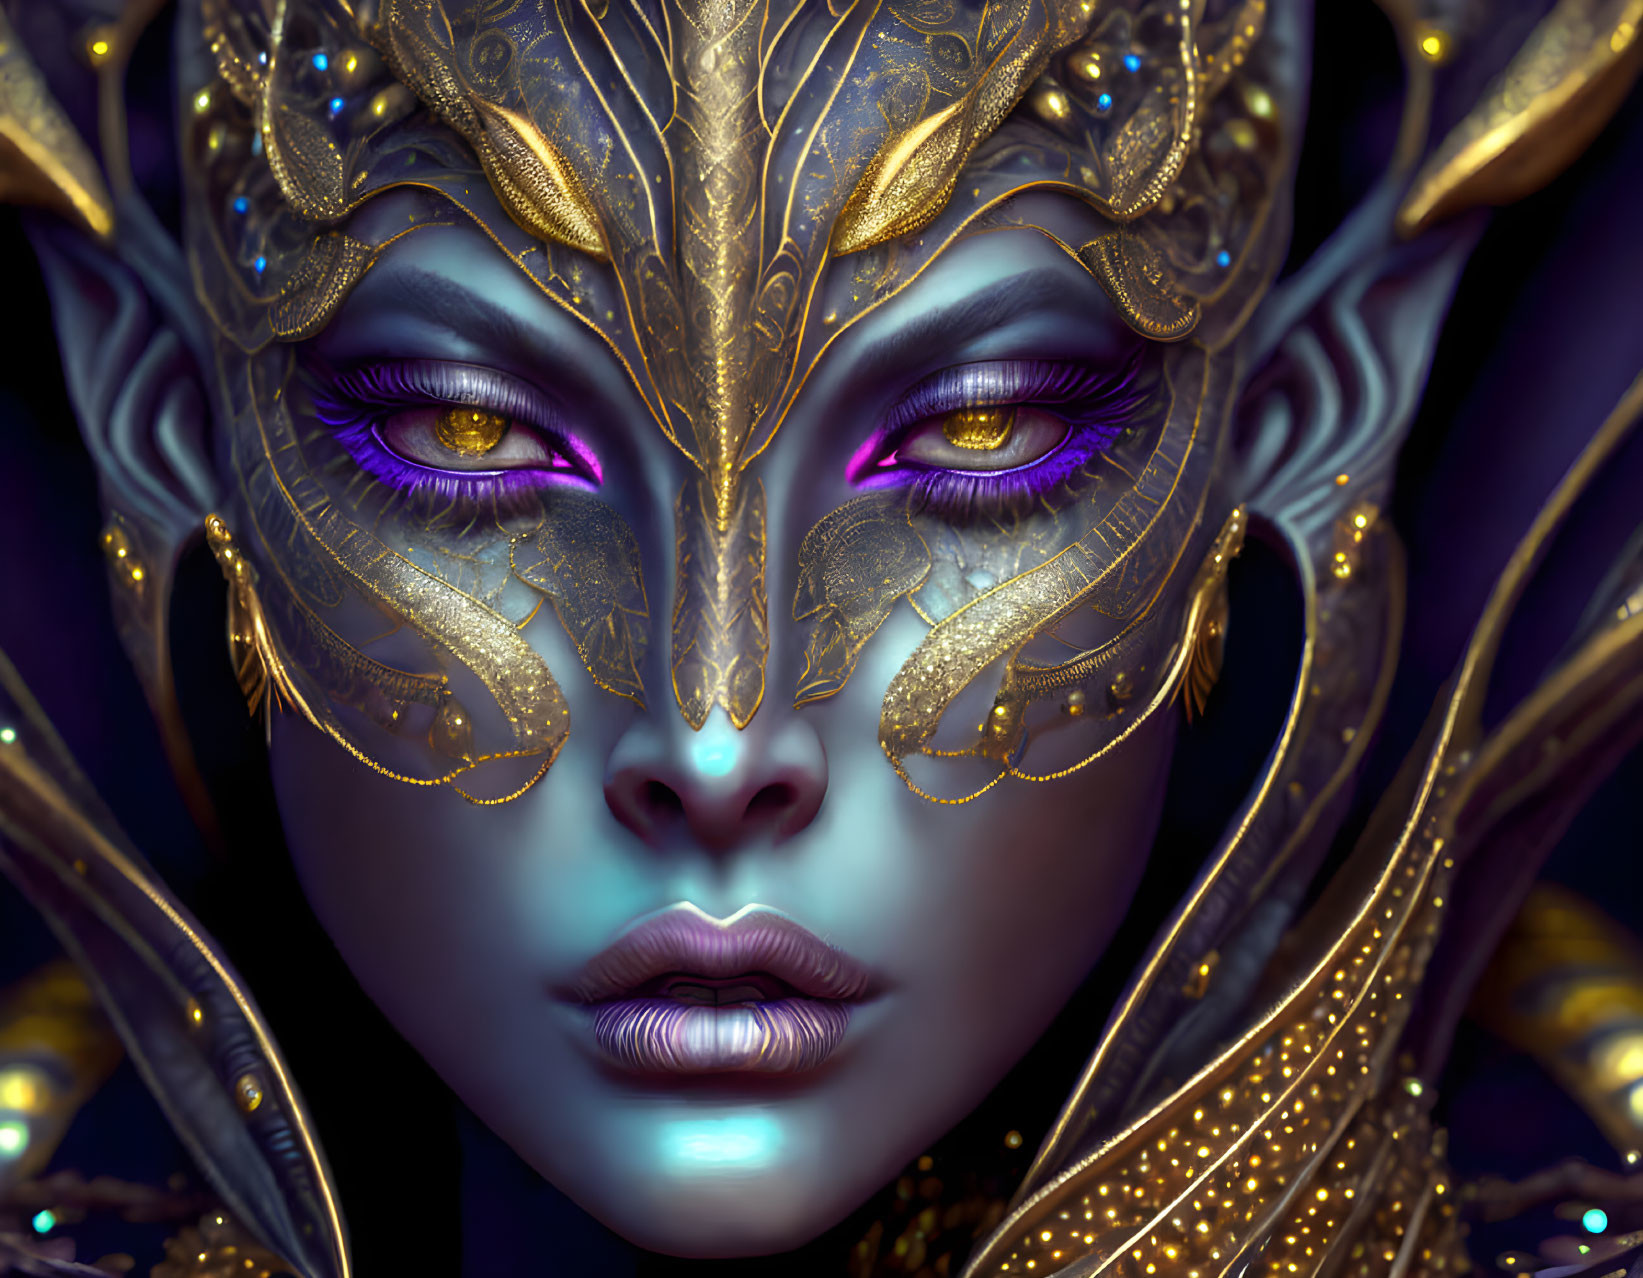 Detailed digital art: Fantastical being with purple eyes, ornate gold and blue mask on dark